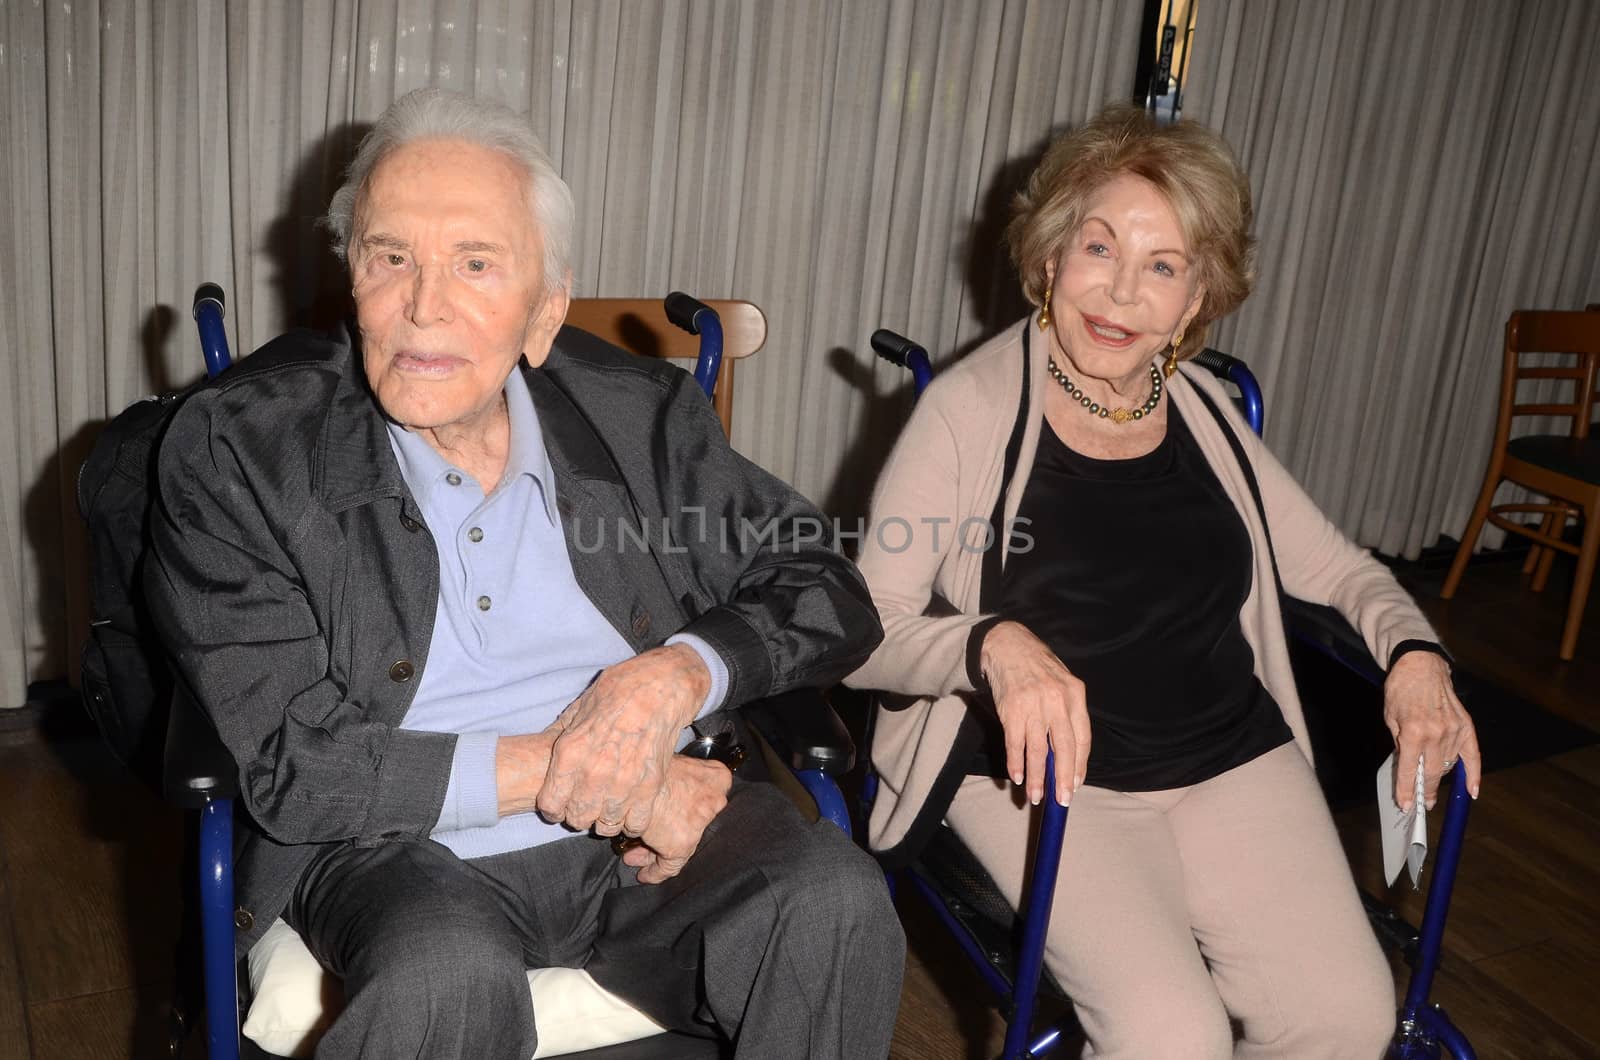 Kirk Douglas, Anne Douglas at the 25th Anniversary of the Anne Douglas Center at the LA Mission, Los Angeles, CA 05-04-17/ImageCollect by ImageCollect